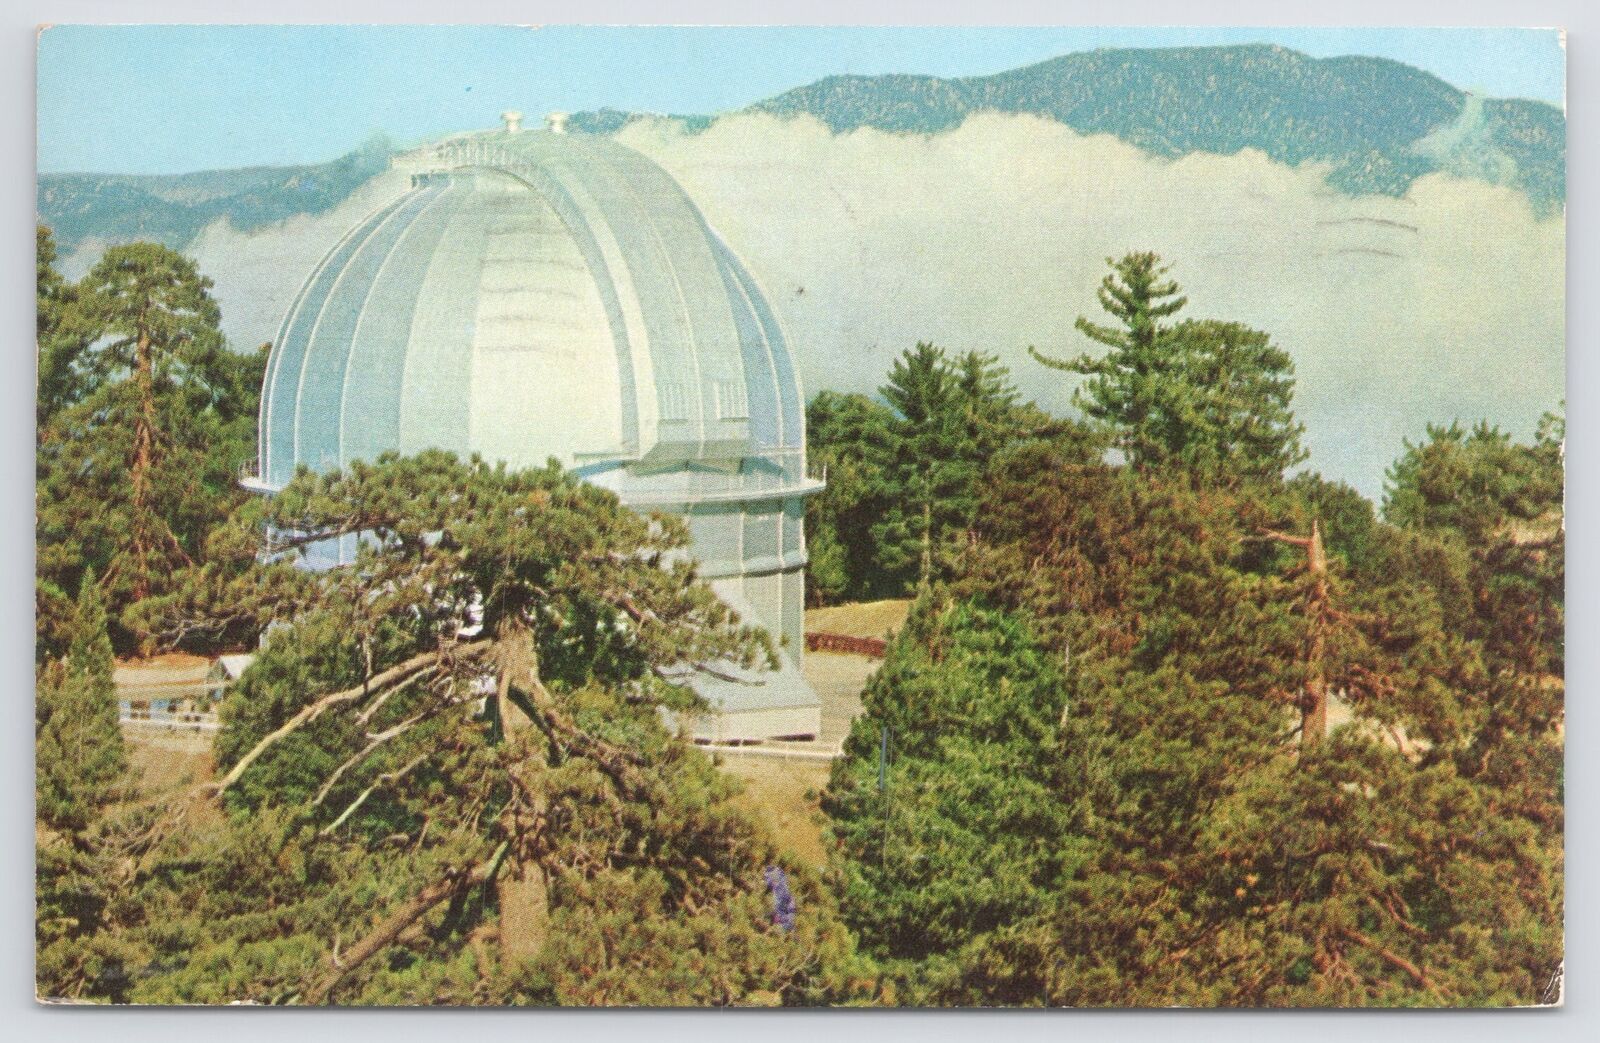 Cloud Formation Around The Mt Wilson Observatory~Sierra Madre Mountains~PM 1956